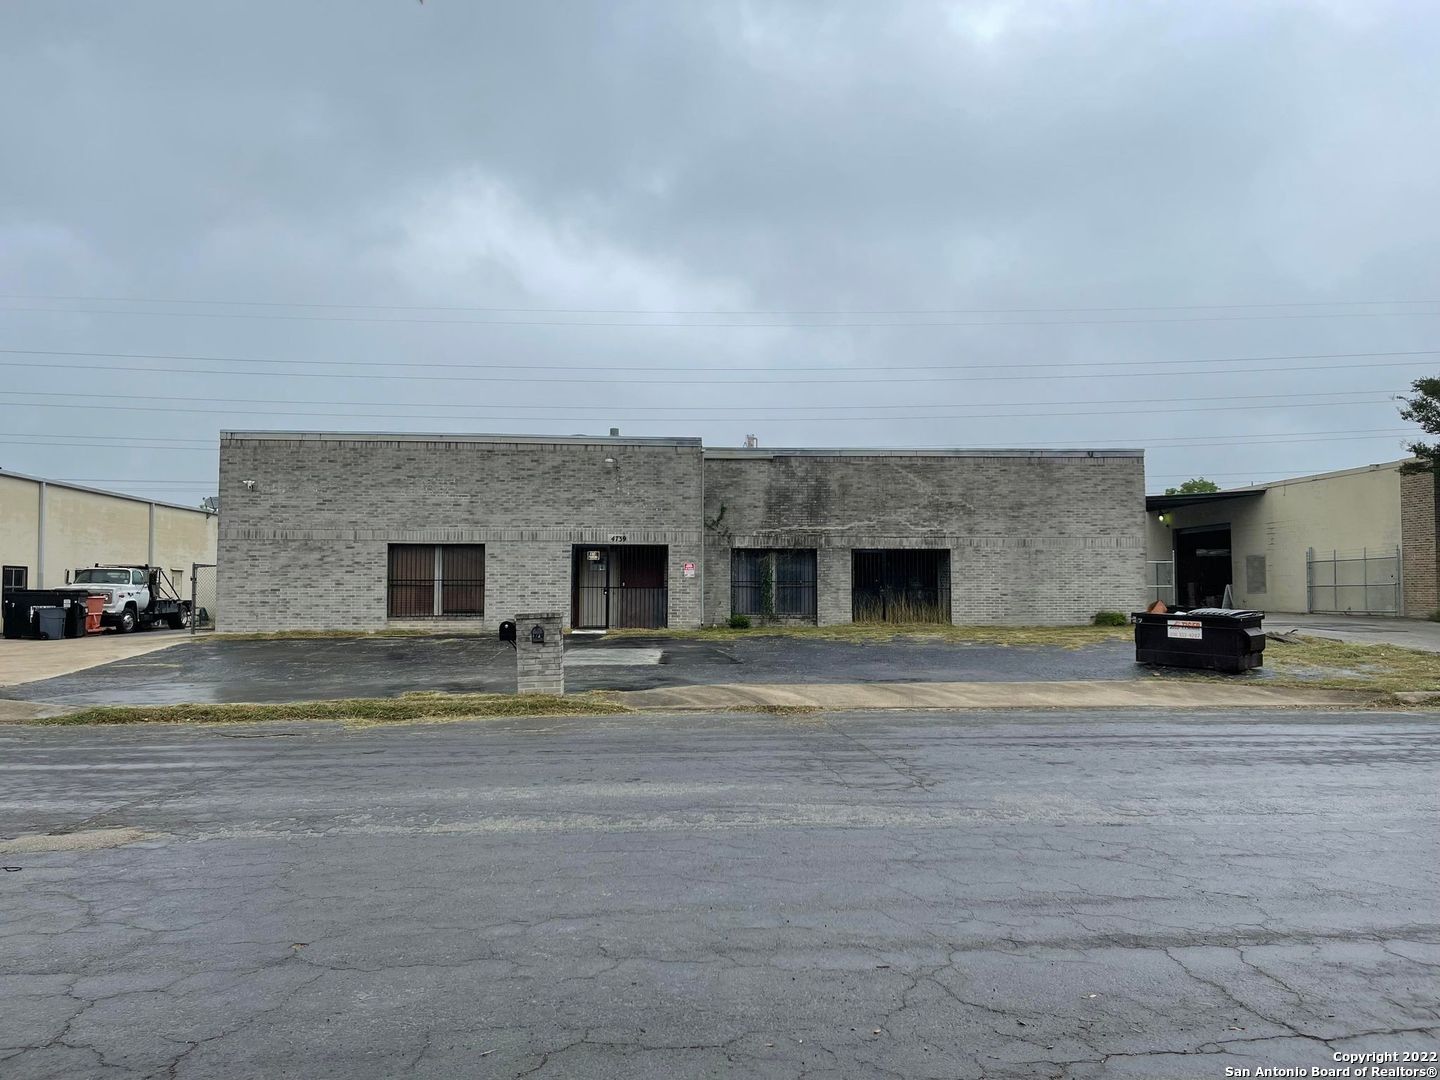 Have you been looking for an Office Warehouse Flex Space with easy access to IH-35 or Loop 410? Come and check out this wonderful location that will be ready for occupancy within 30 days.  Front entrance opens up to a kitchen and open area that would be great for a conference room, bullpen or training area.  There are 5 private offices and 2 Full Bathrooms with Walk In Showers. The shop features 16 Foot Clear Height Ceilings as well as mezzanine for storage. There are two Grade Level Roll-Up exterior doors that measure 12'Wx16'H & 16'Wx12'H.  There is also an exterior dock-high ramp for unloading trucks.  3 Phase Power.  Block Exterior and Flat Roof.  Fenced Yard.  I-2 Zoning. 0.51 Acres.  Sold As-Is.